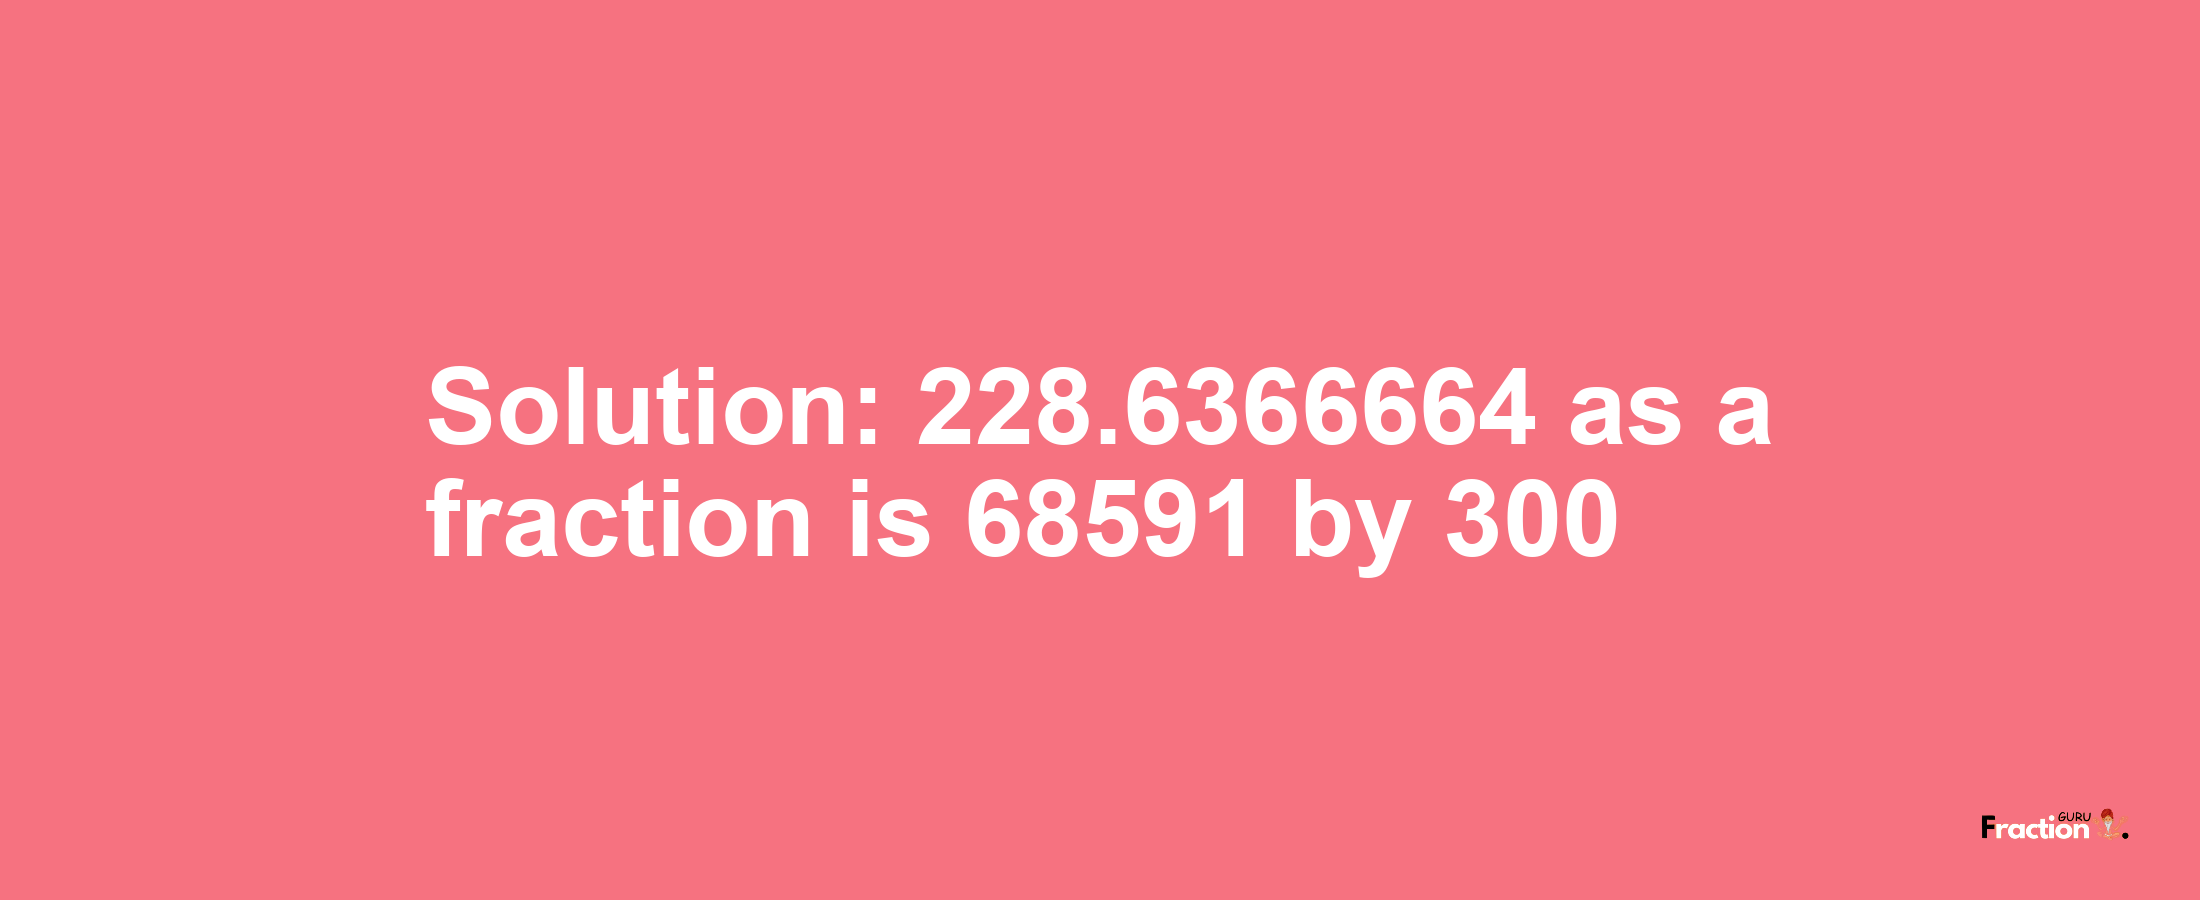 Solution:228.6366664 as a fraction is 68591/300